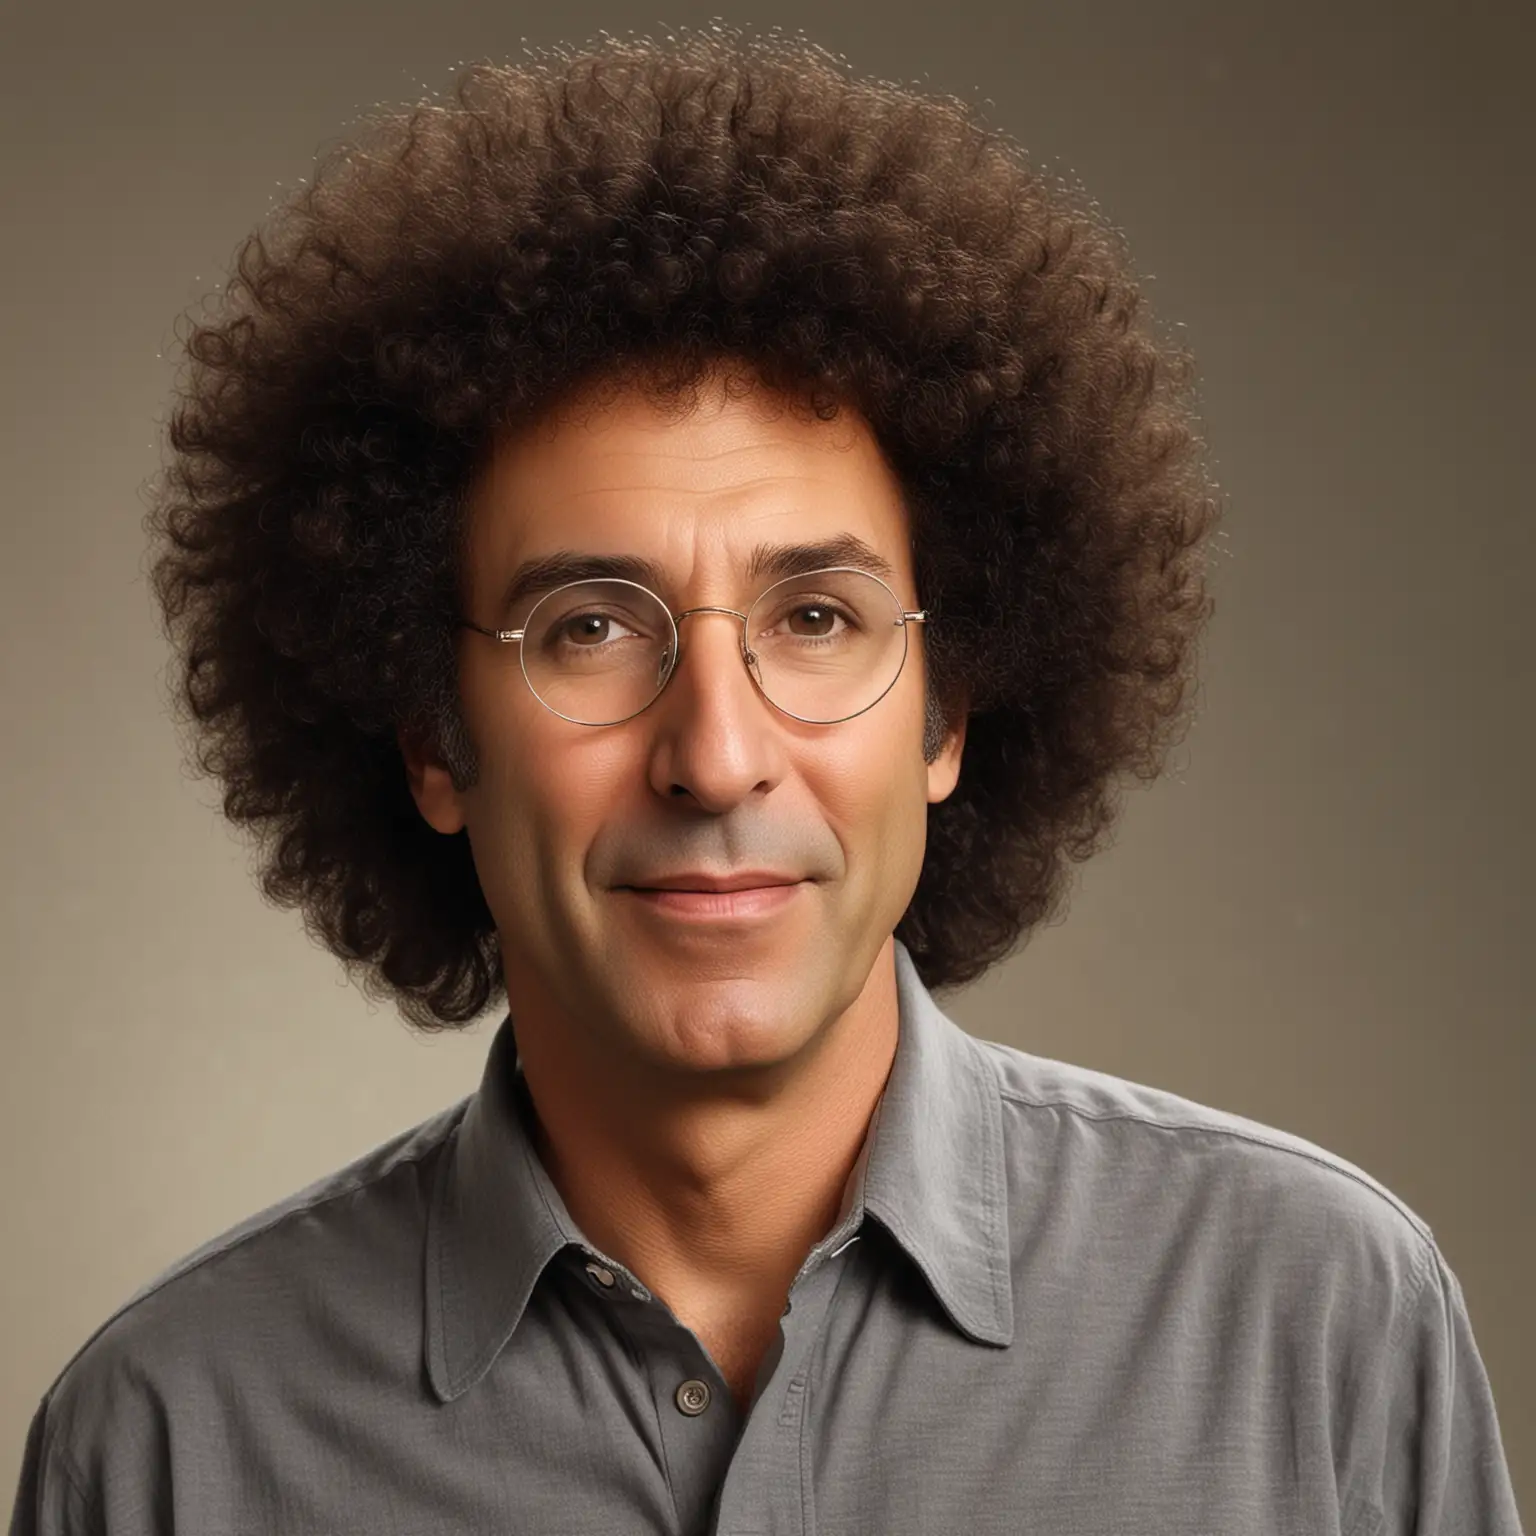 Comedian Larry David in Retro Full Afro Hairstyle